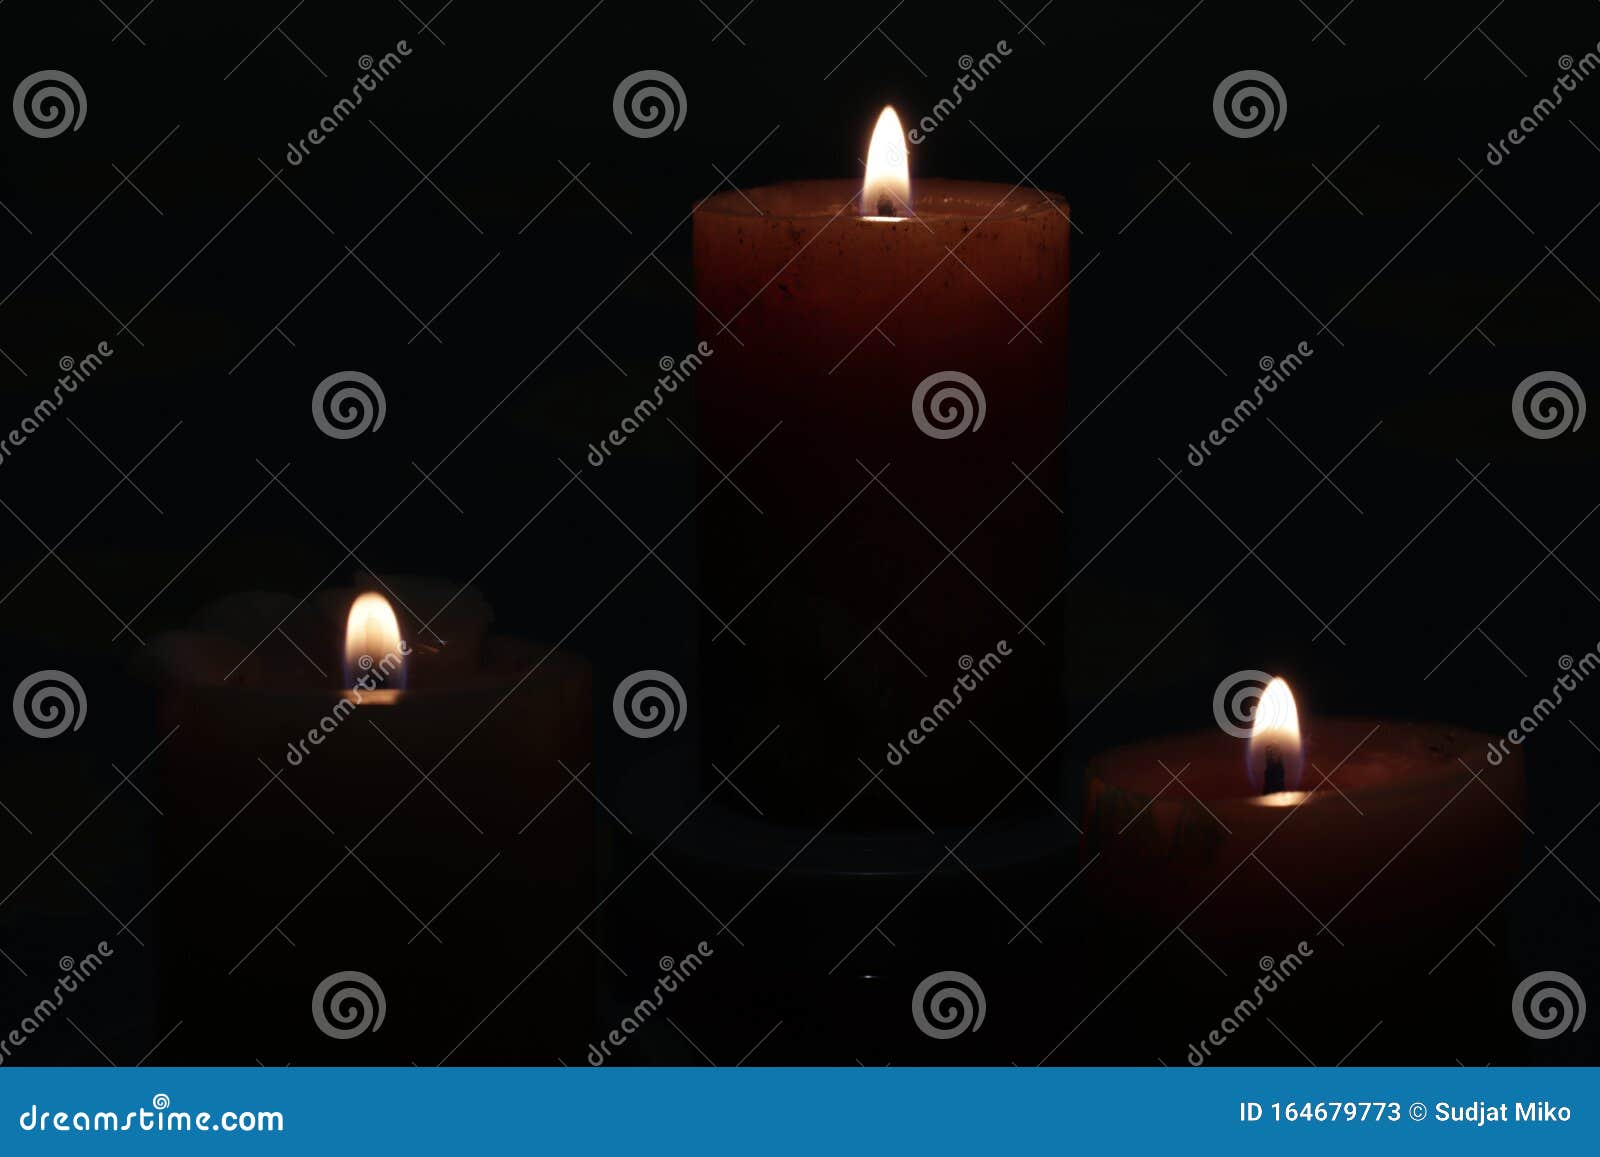 Candlelight in the Dark of the Night. Stock Image - Image of lighting ...